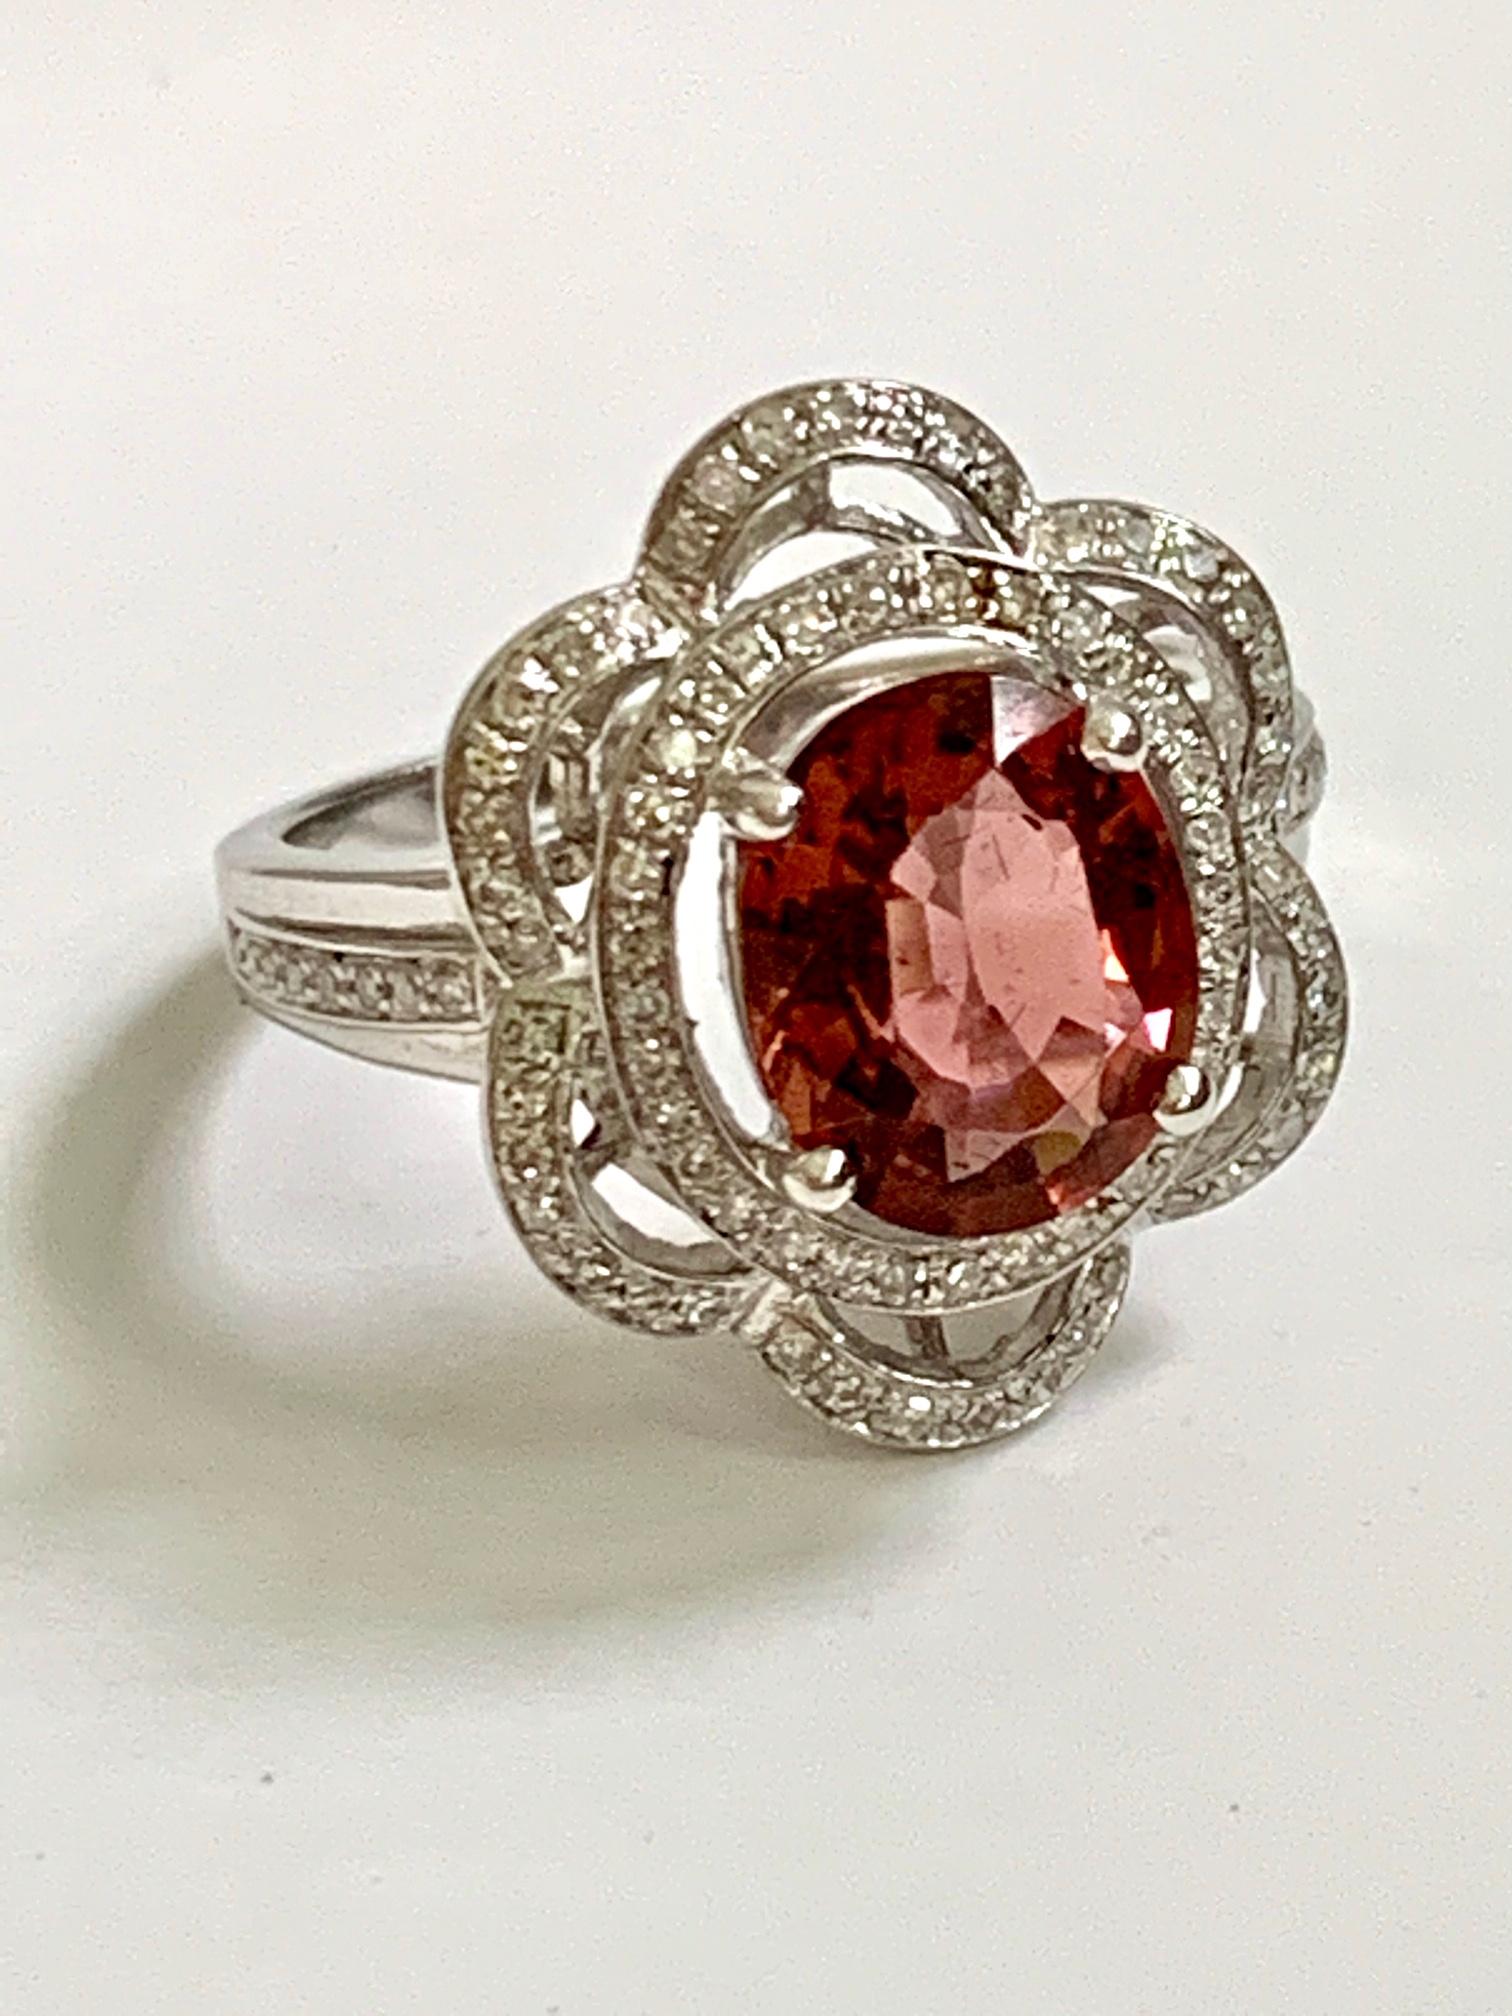 This is a beautiful vintage 14k white gold ring with a large oval faceted tourmaline. This stone is dark red; almost brownish red in color. The gemstone is surrounded by a flower halo of diamonds.

The stone is 2.5ct.  The diamonds total